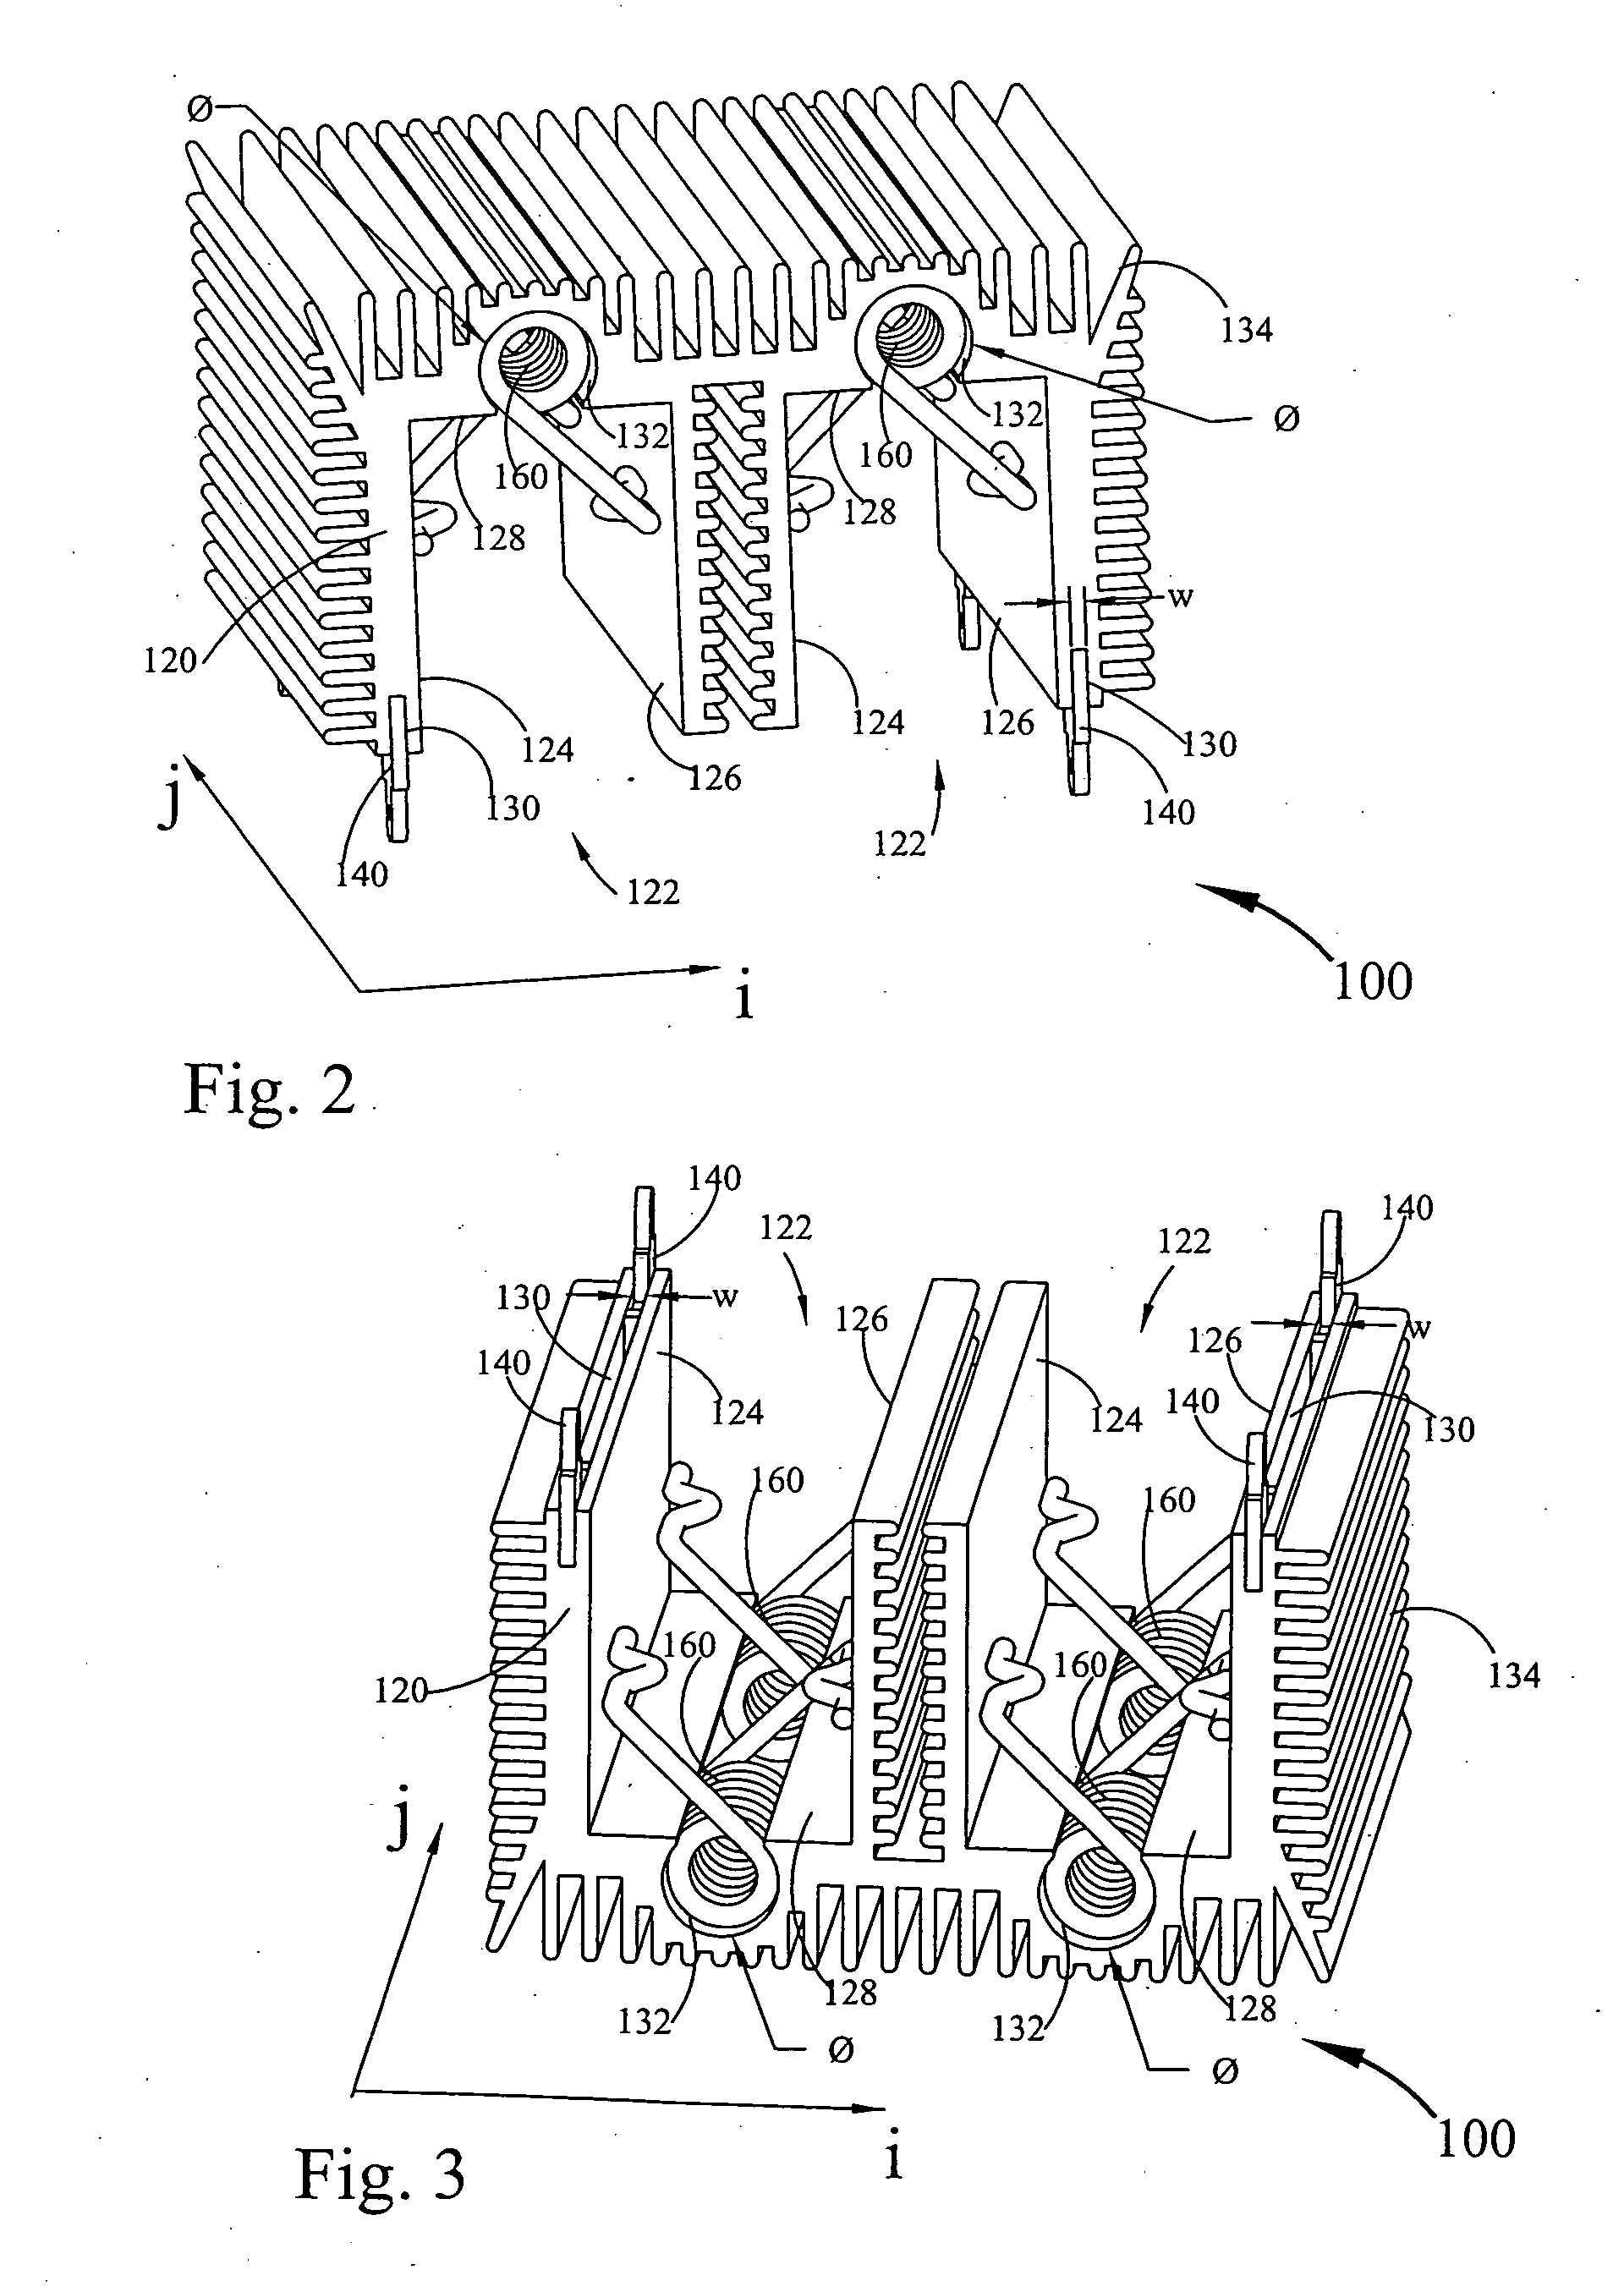 Configurable heat sink with matrix clipping system